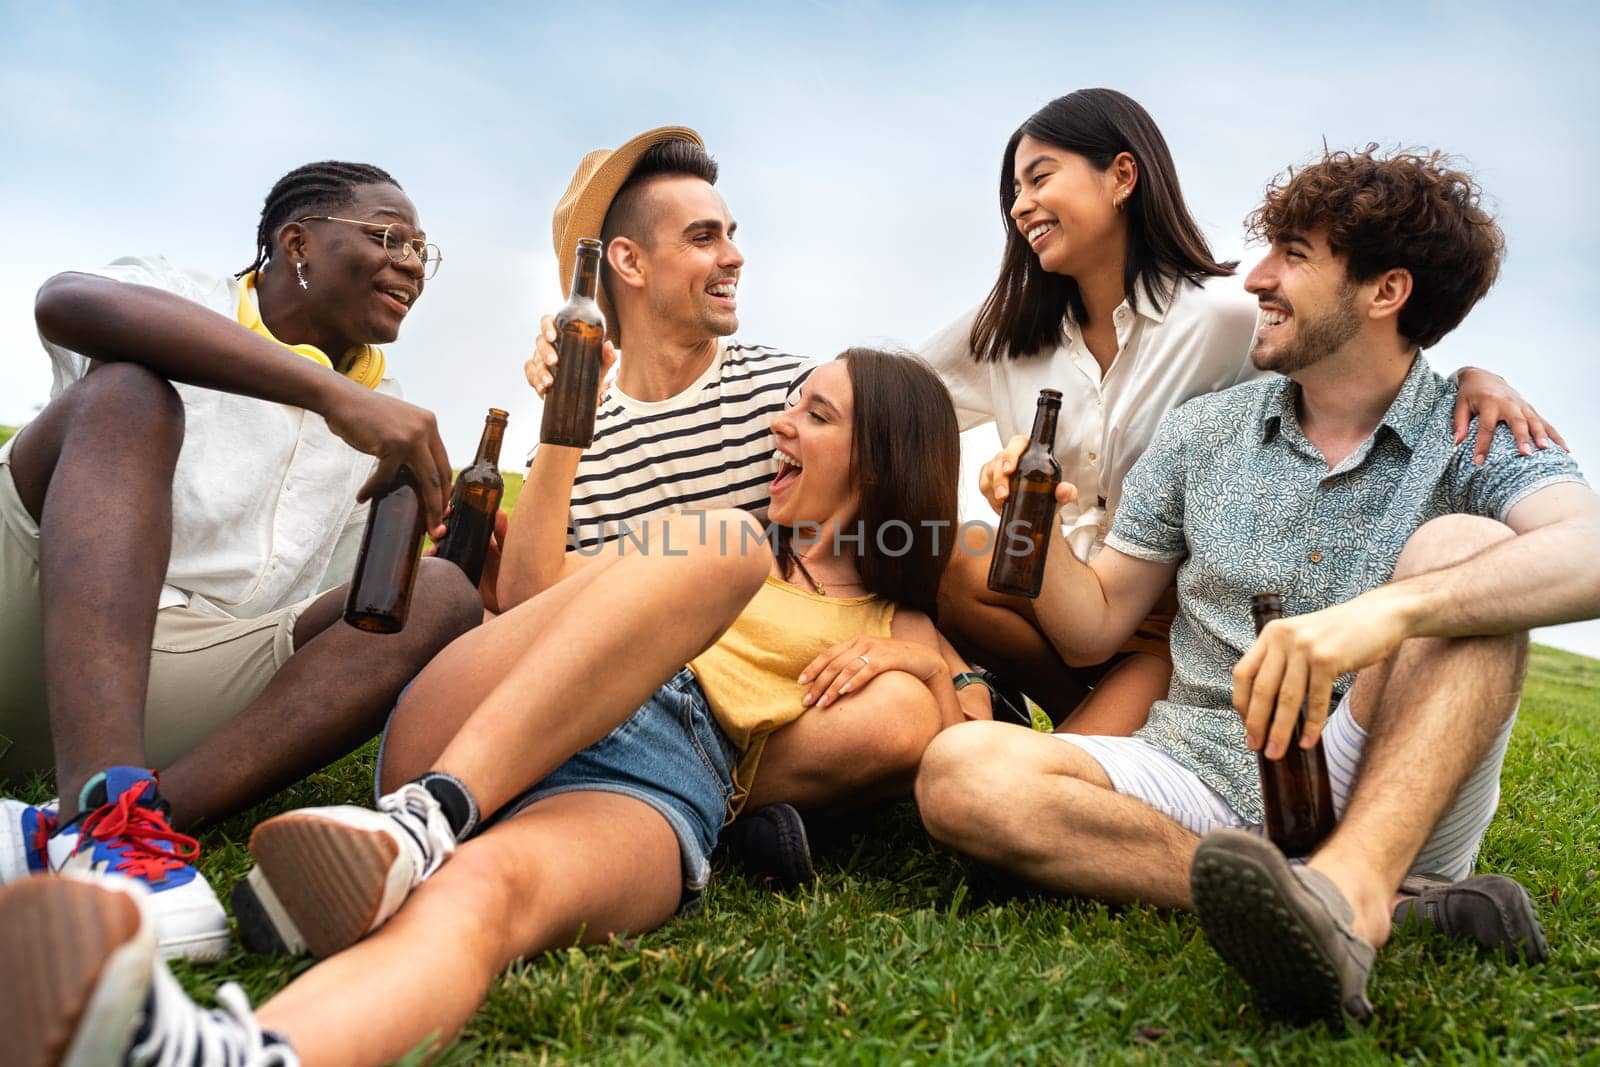 Multiracial friends having fun together drinking beer and laughing outdoors. Friendship concept.